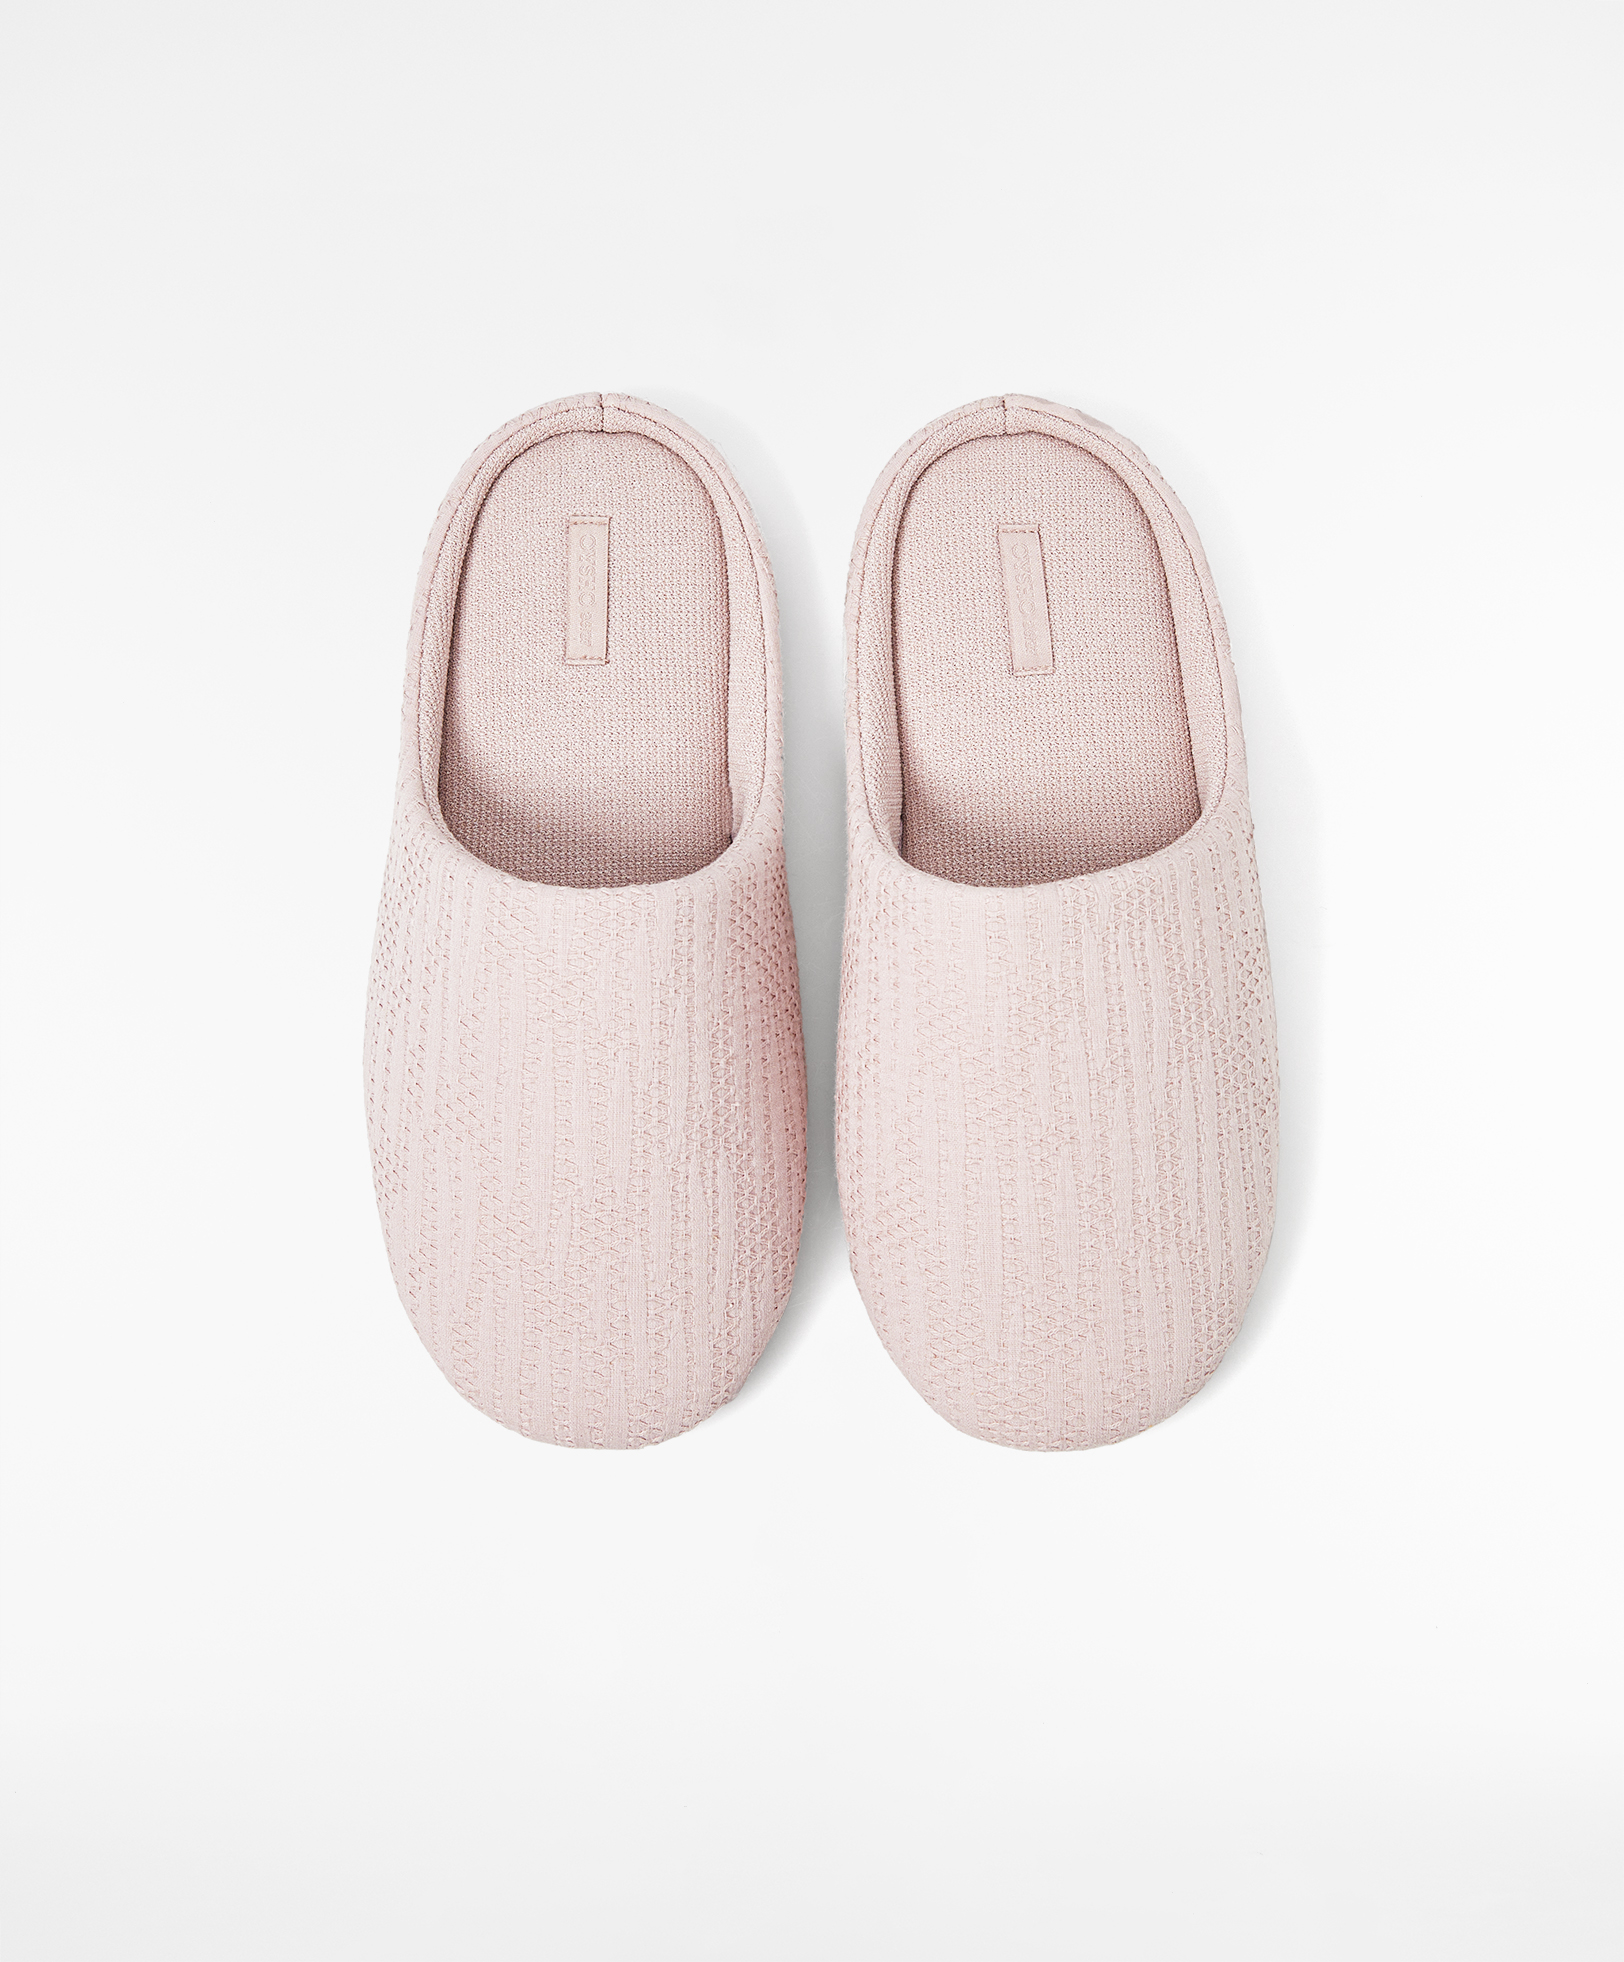 Basic embroidered slippers